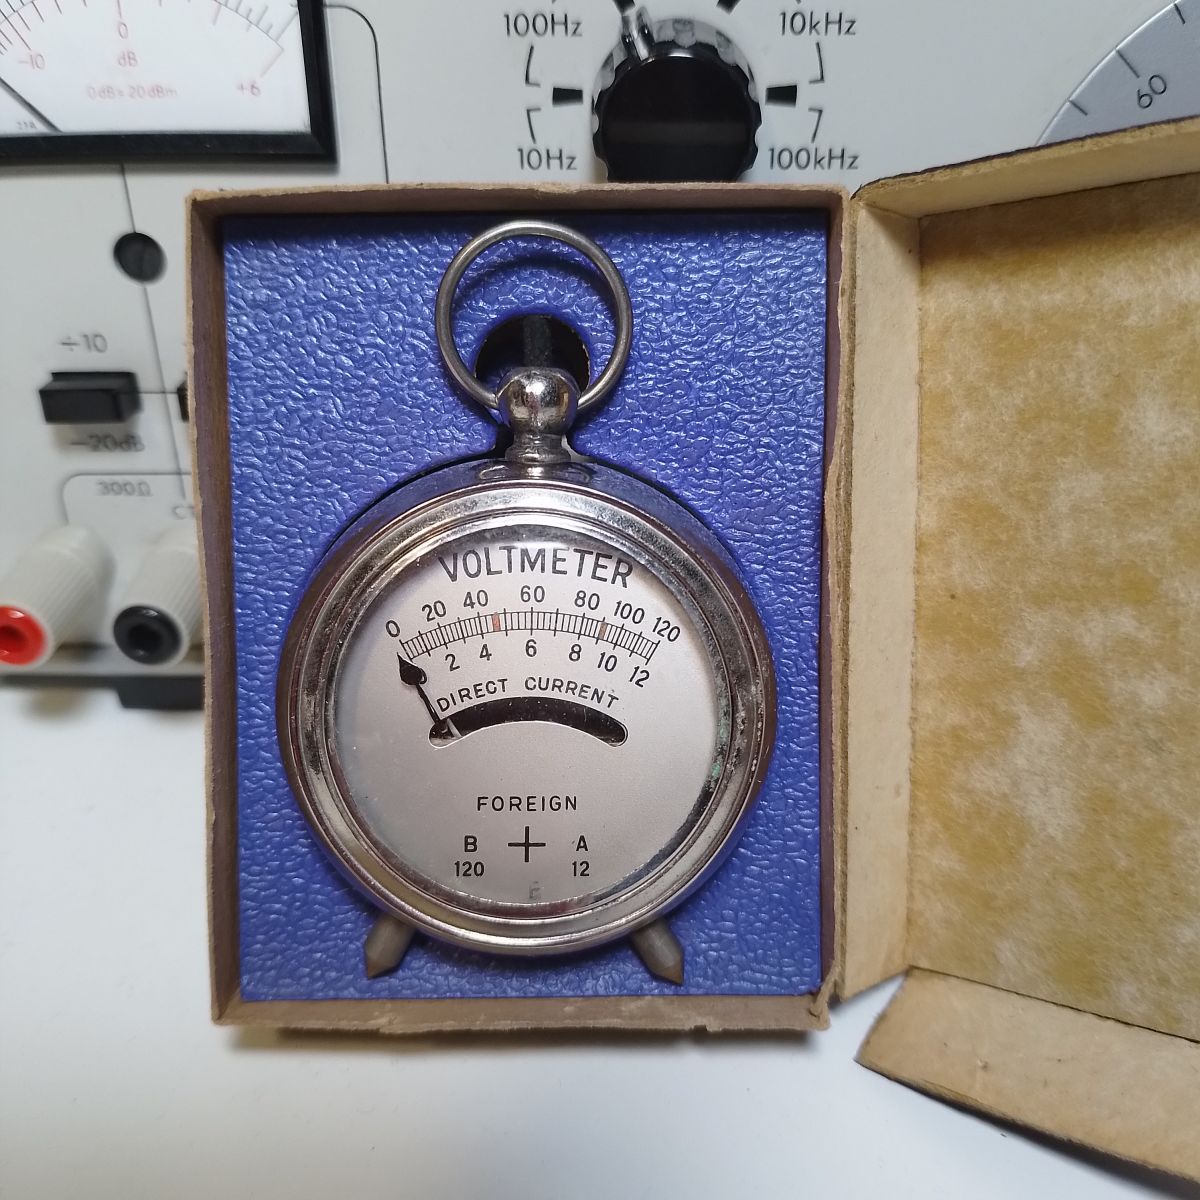 Voltmeter in its box